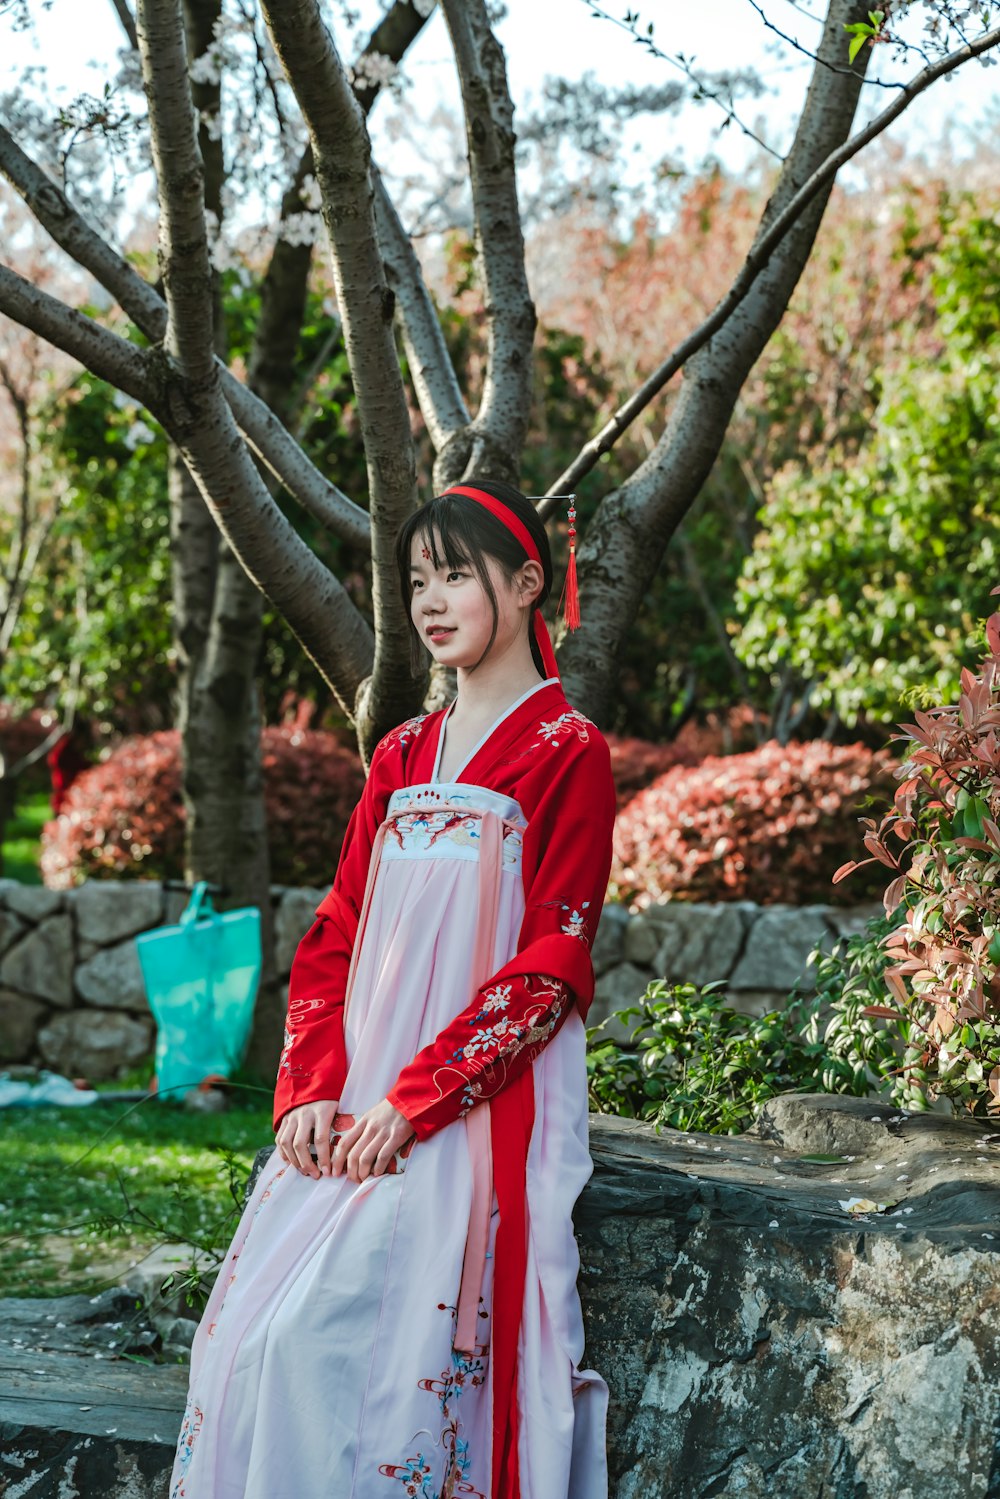 woman wearing white and red dress standing near trees during daytime